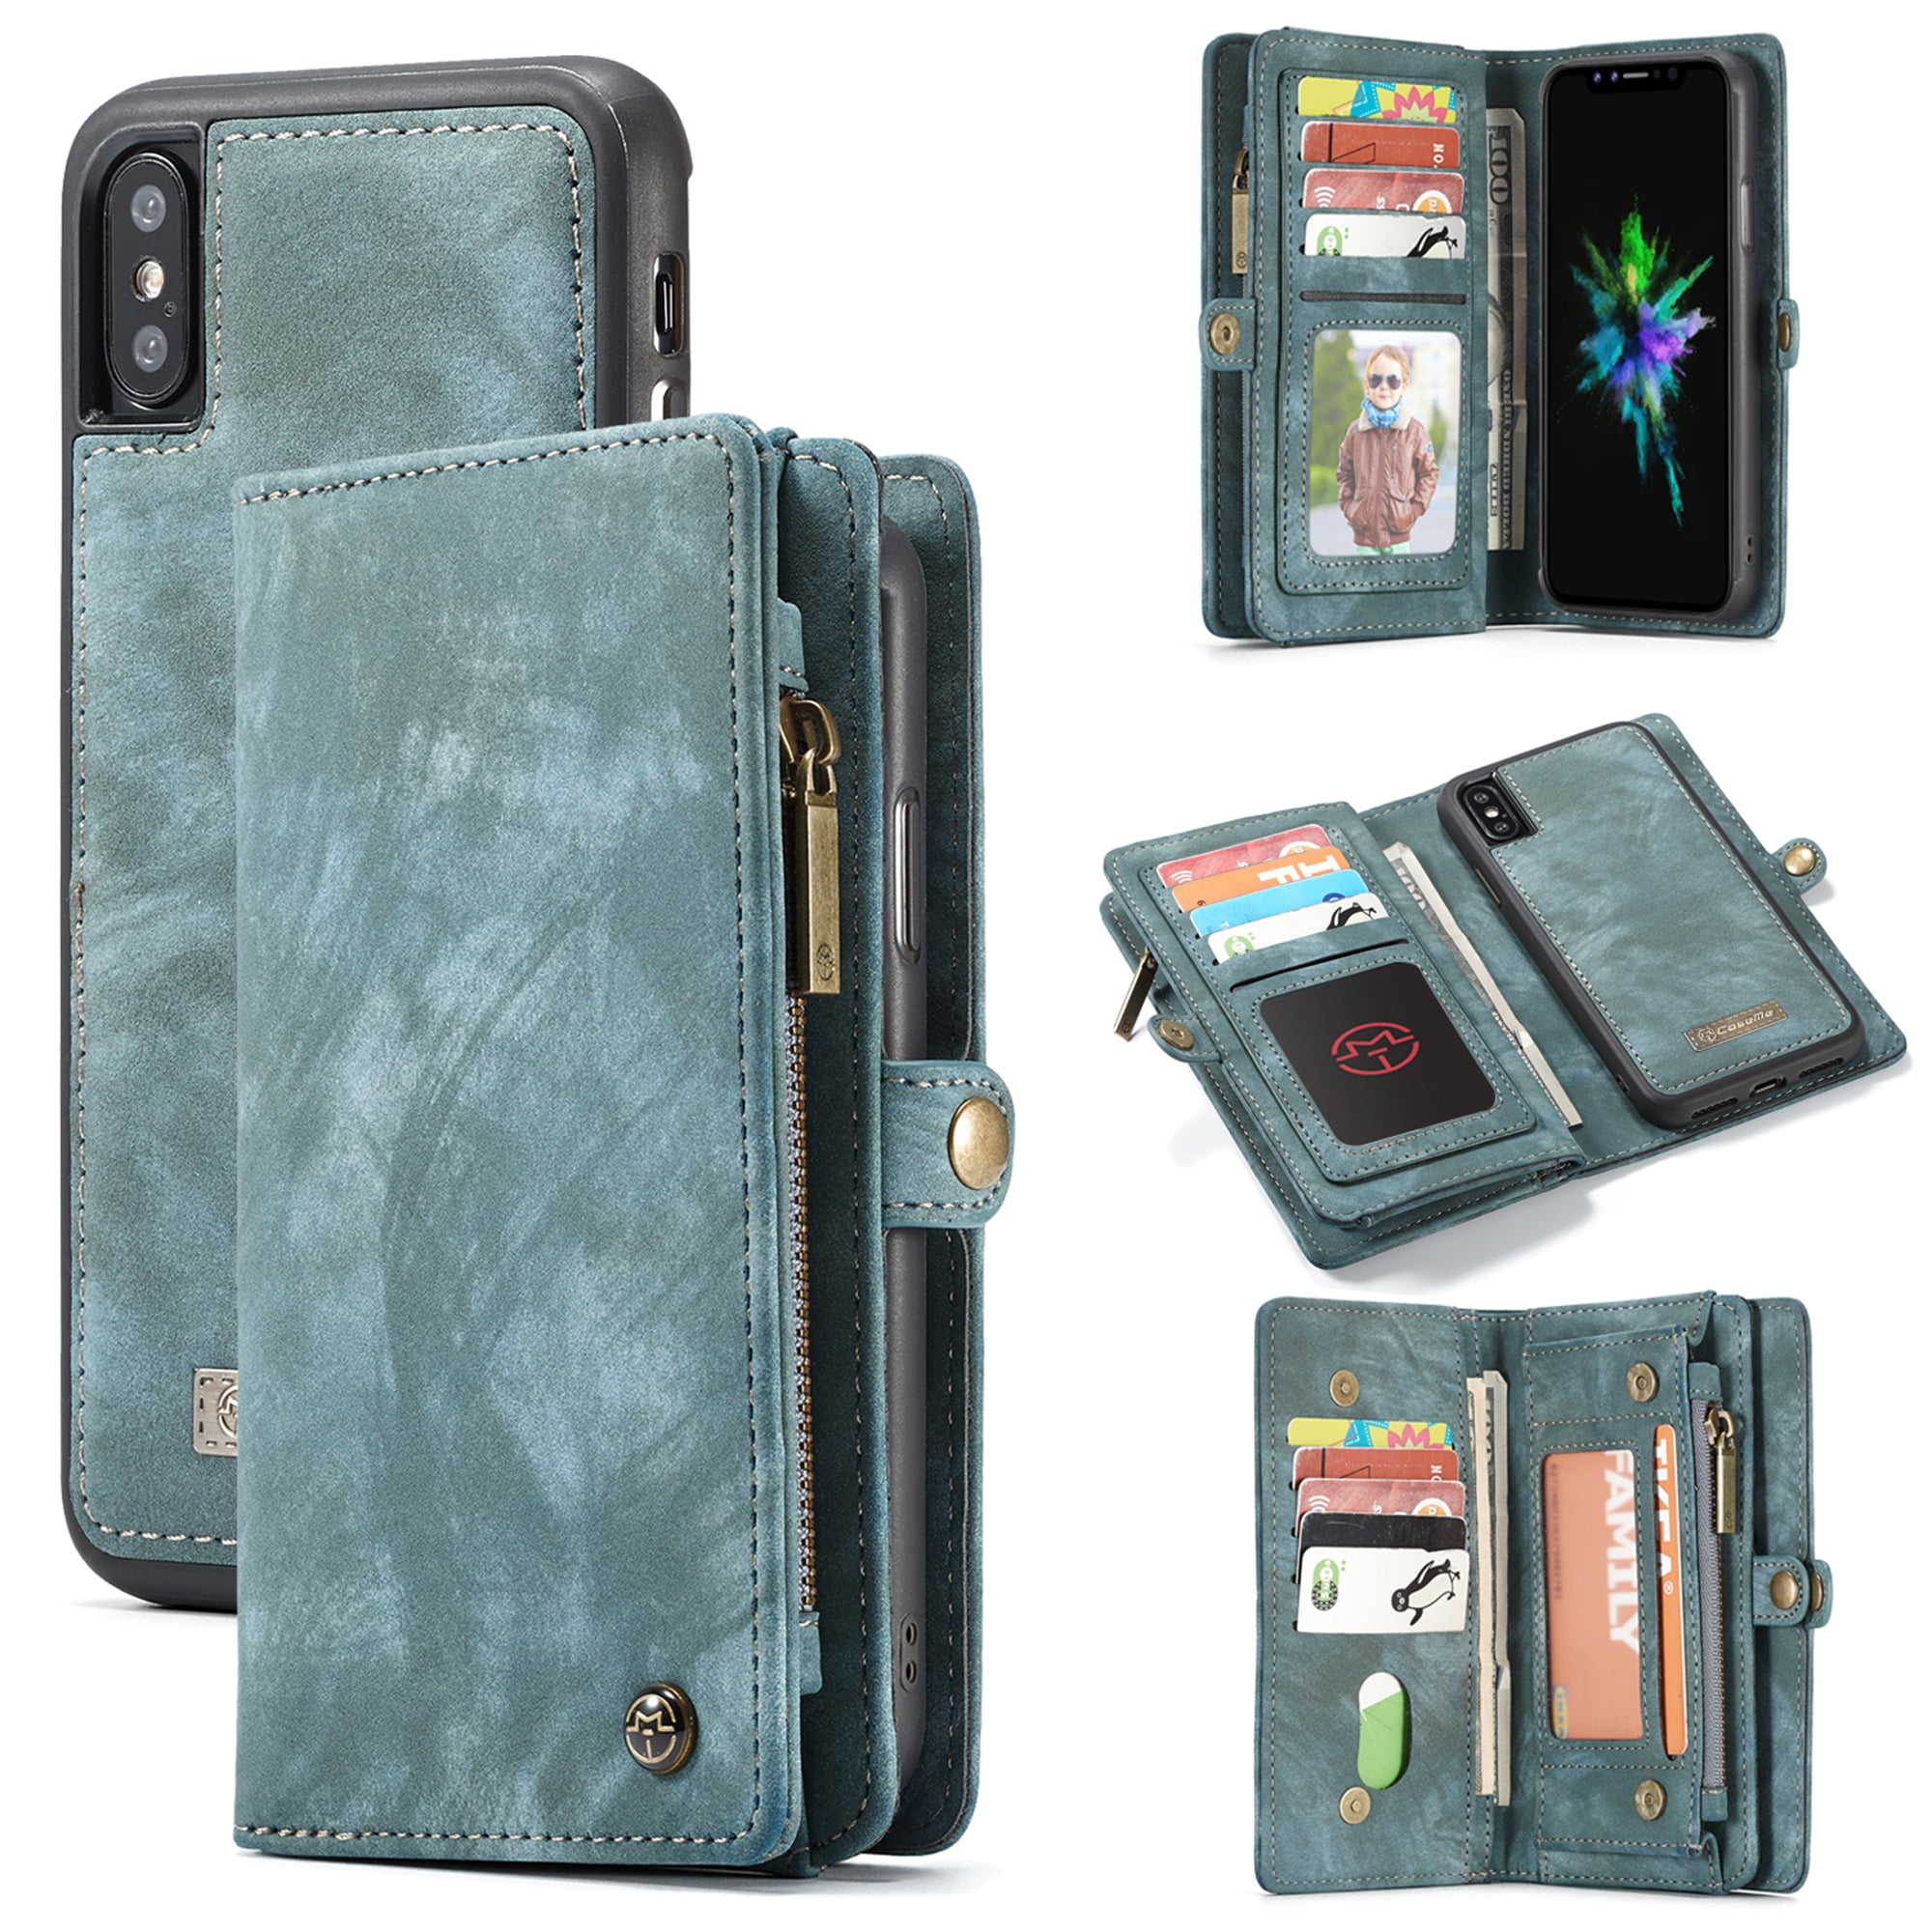 Leather Flip Case for iPhone X with Waterproof Pouch for Smart Phone Business Wallet Cover Compatible with iPhone X 